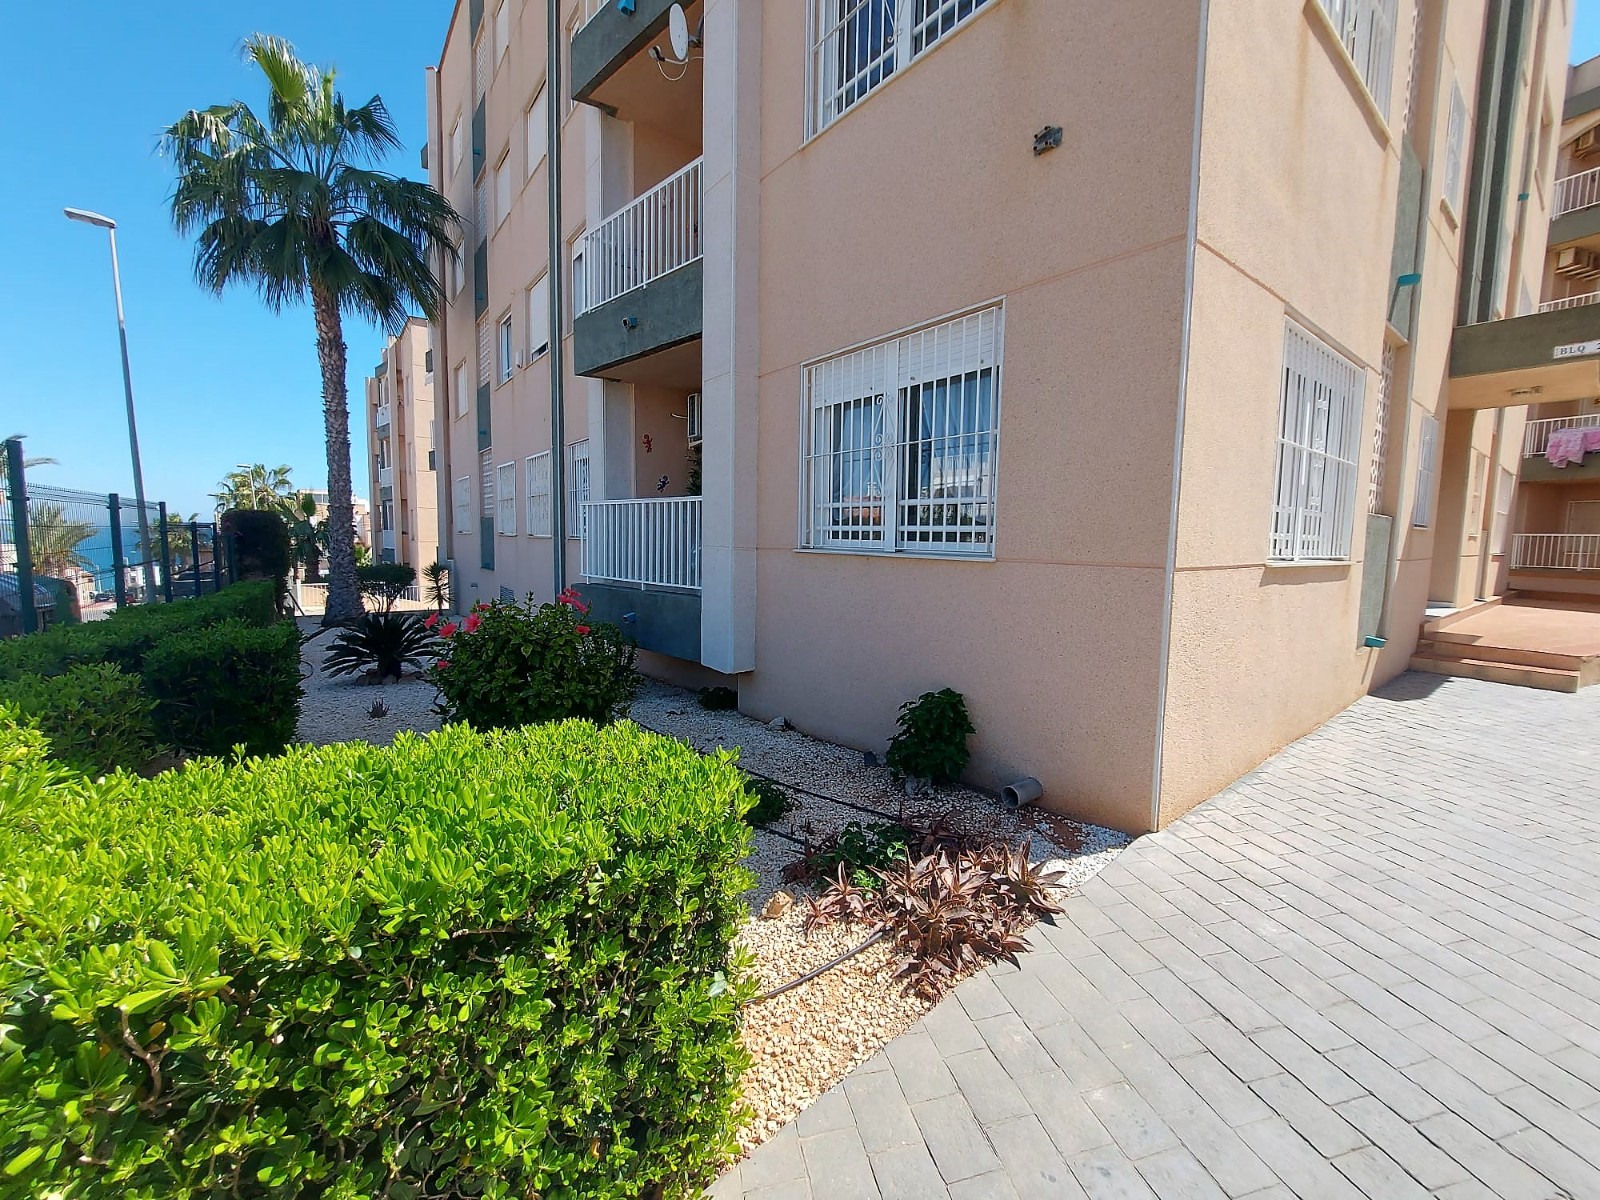 For sale: 2 bedroom apartment / flat in Torrevieja